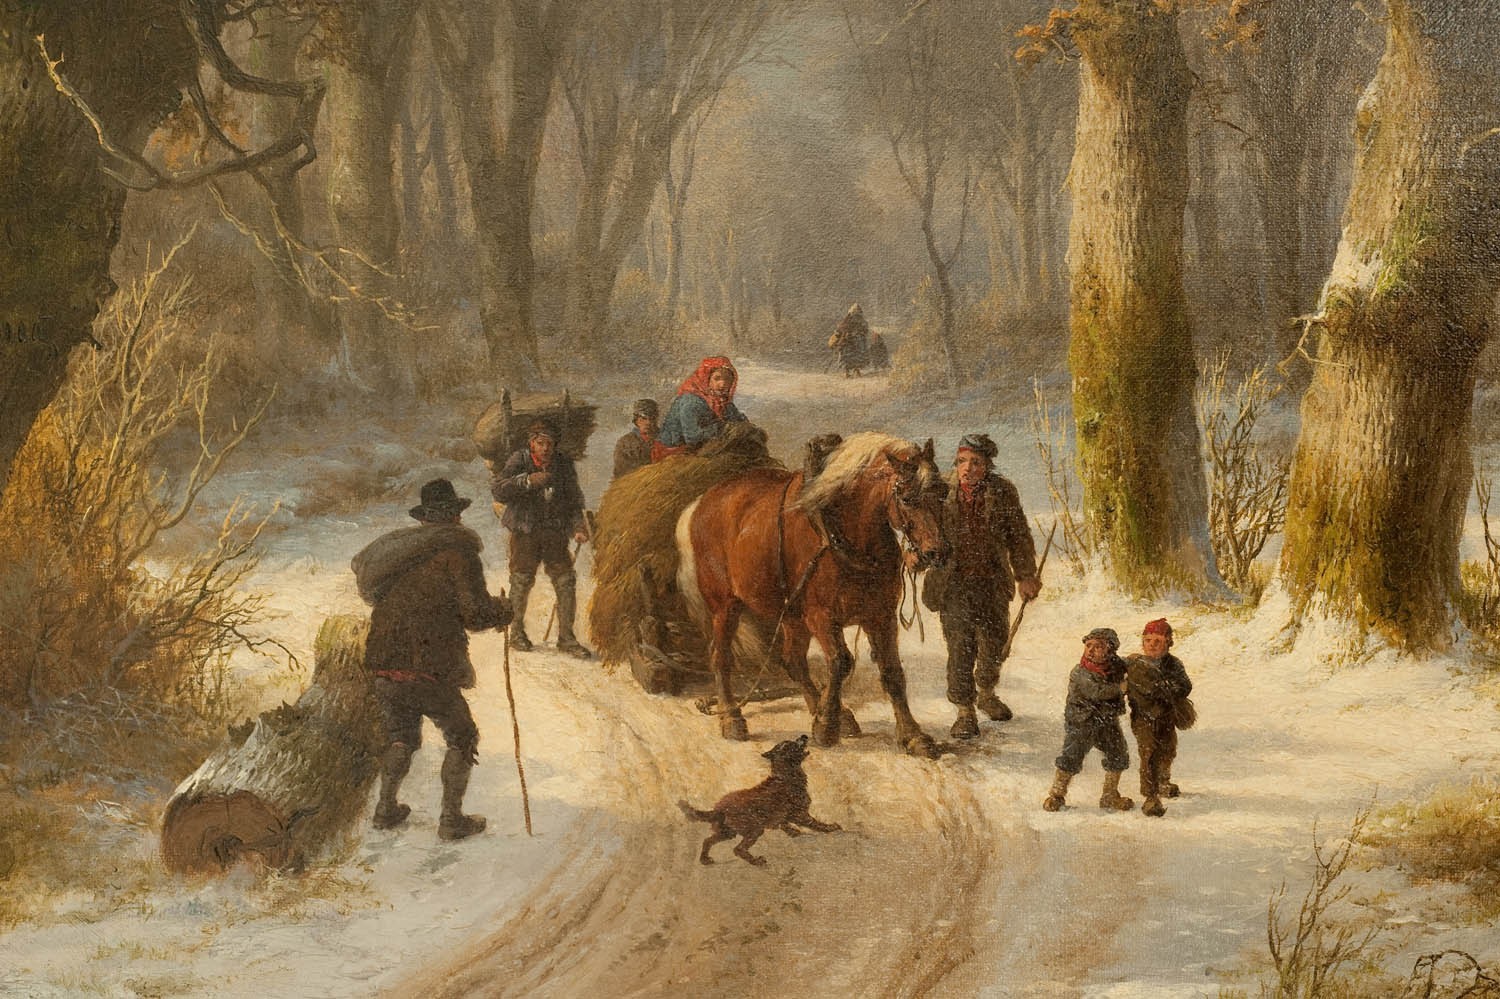 Painting Classic Art Peasants Children Dirt Road Horse Log Dog Trees Forest Snow 1500x999